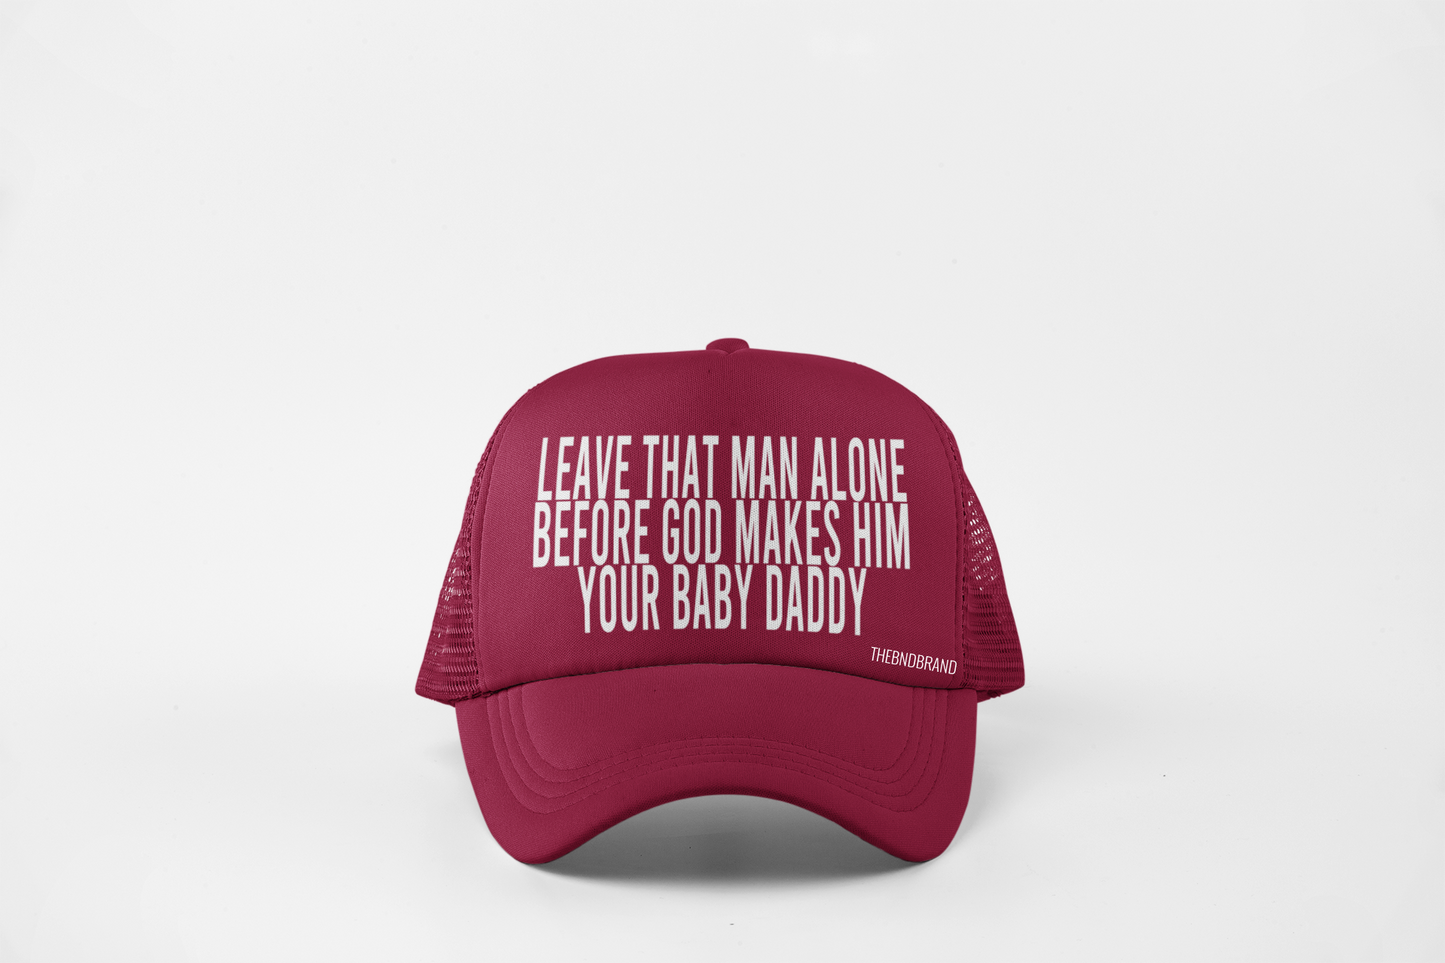 LEAVE THAT MAN ALONE BEFORE GOD MAKES HIM YOUR BABY DADDY HAT